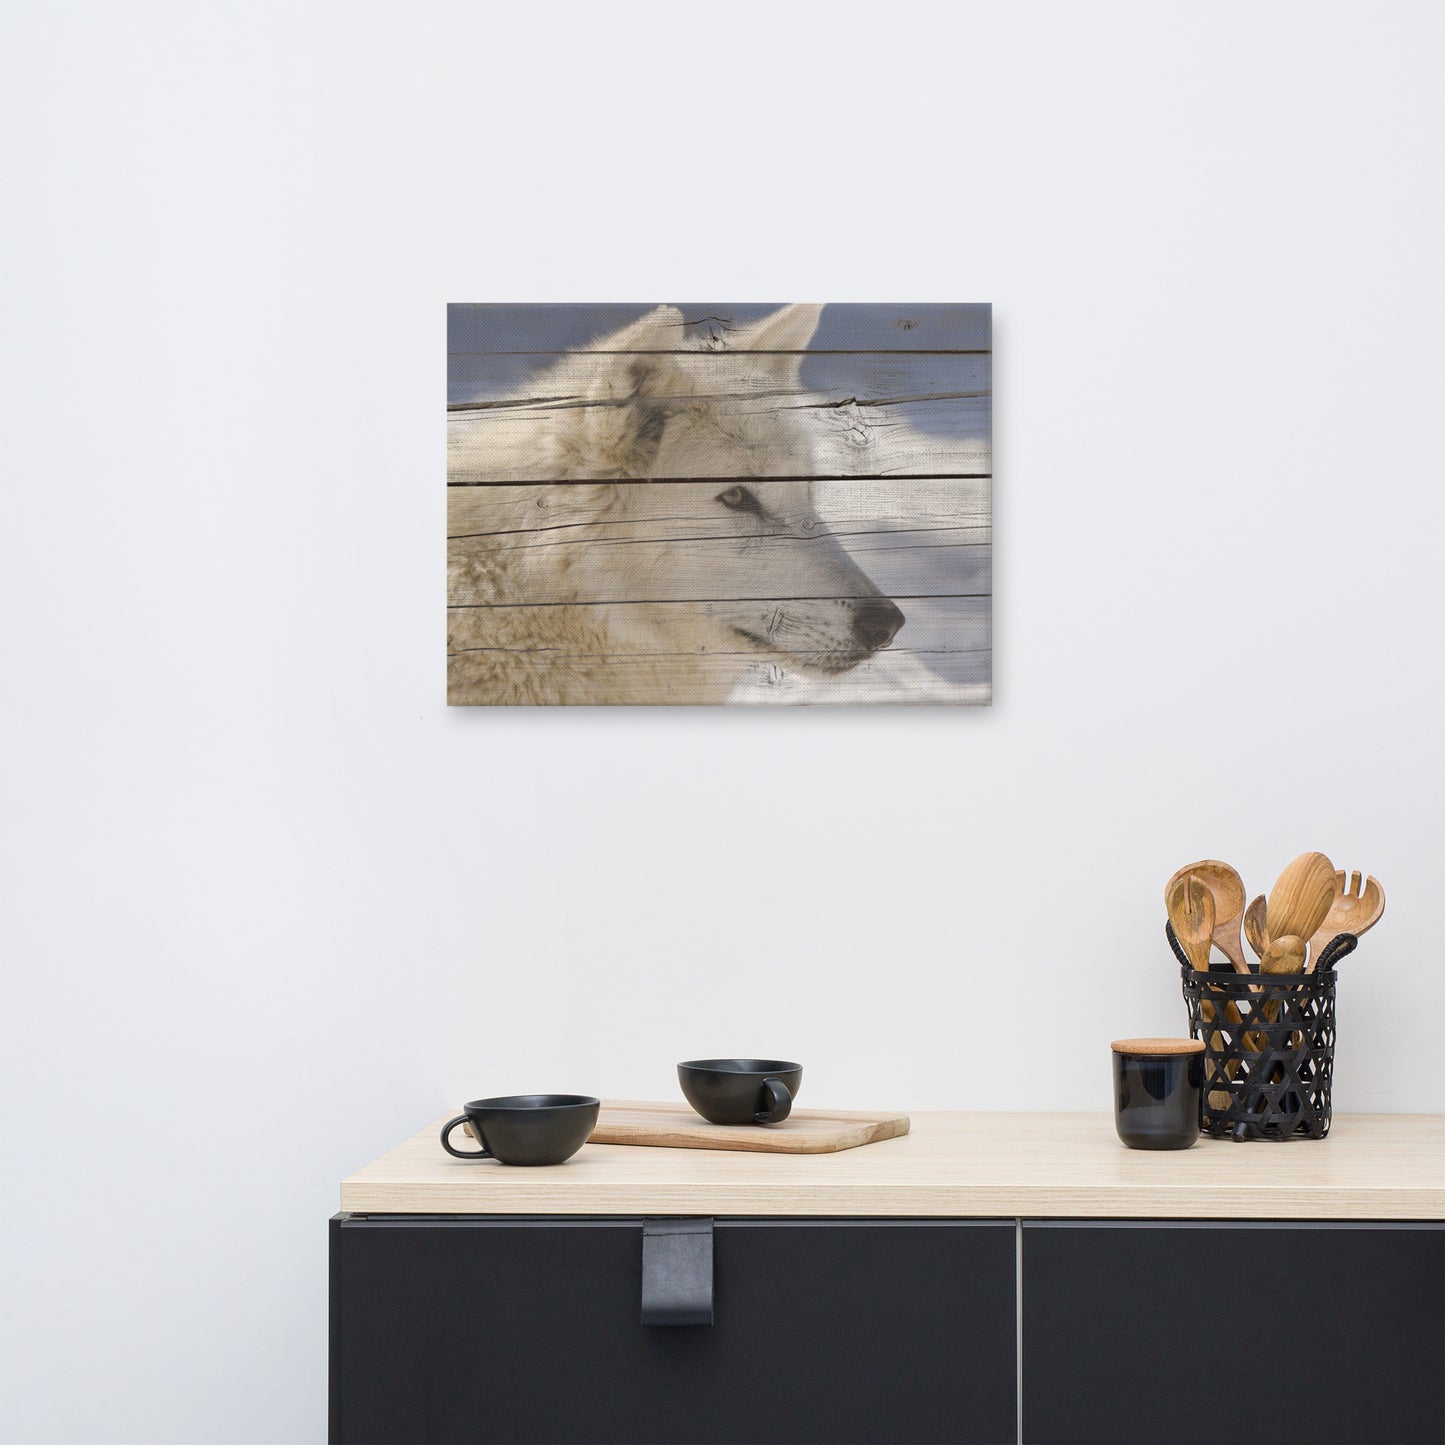 Rustic Canvas Co: Aries the White Wolf Portrait on Faux Weathered Wood Texture - Wildlife / Animal / Nature Photograph Canvas Wall Art Print - Artwork